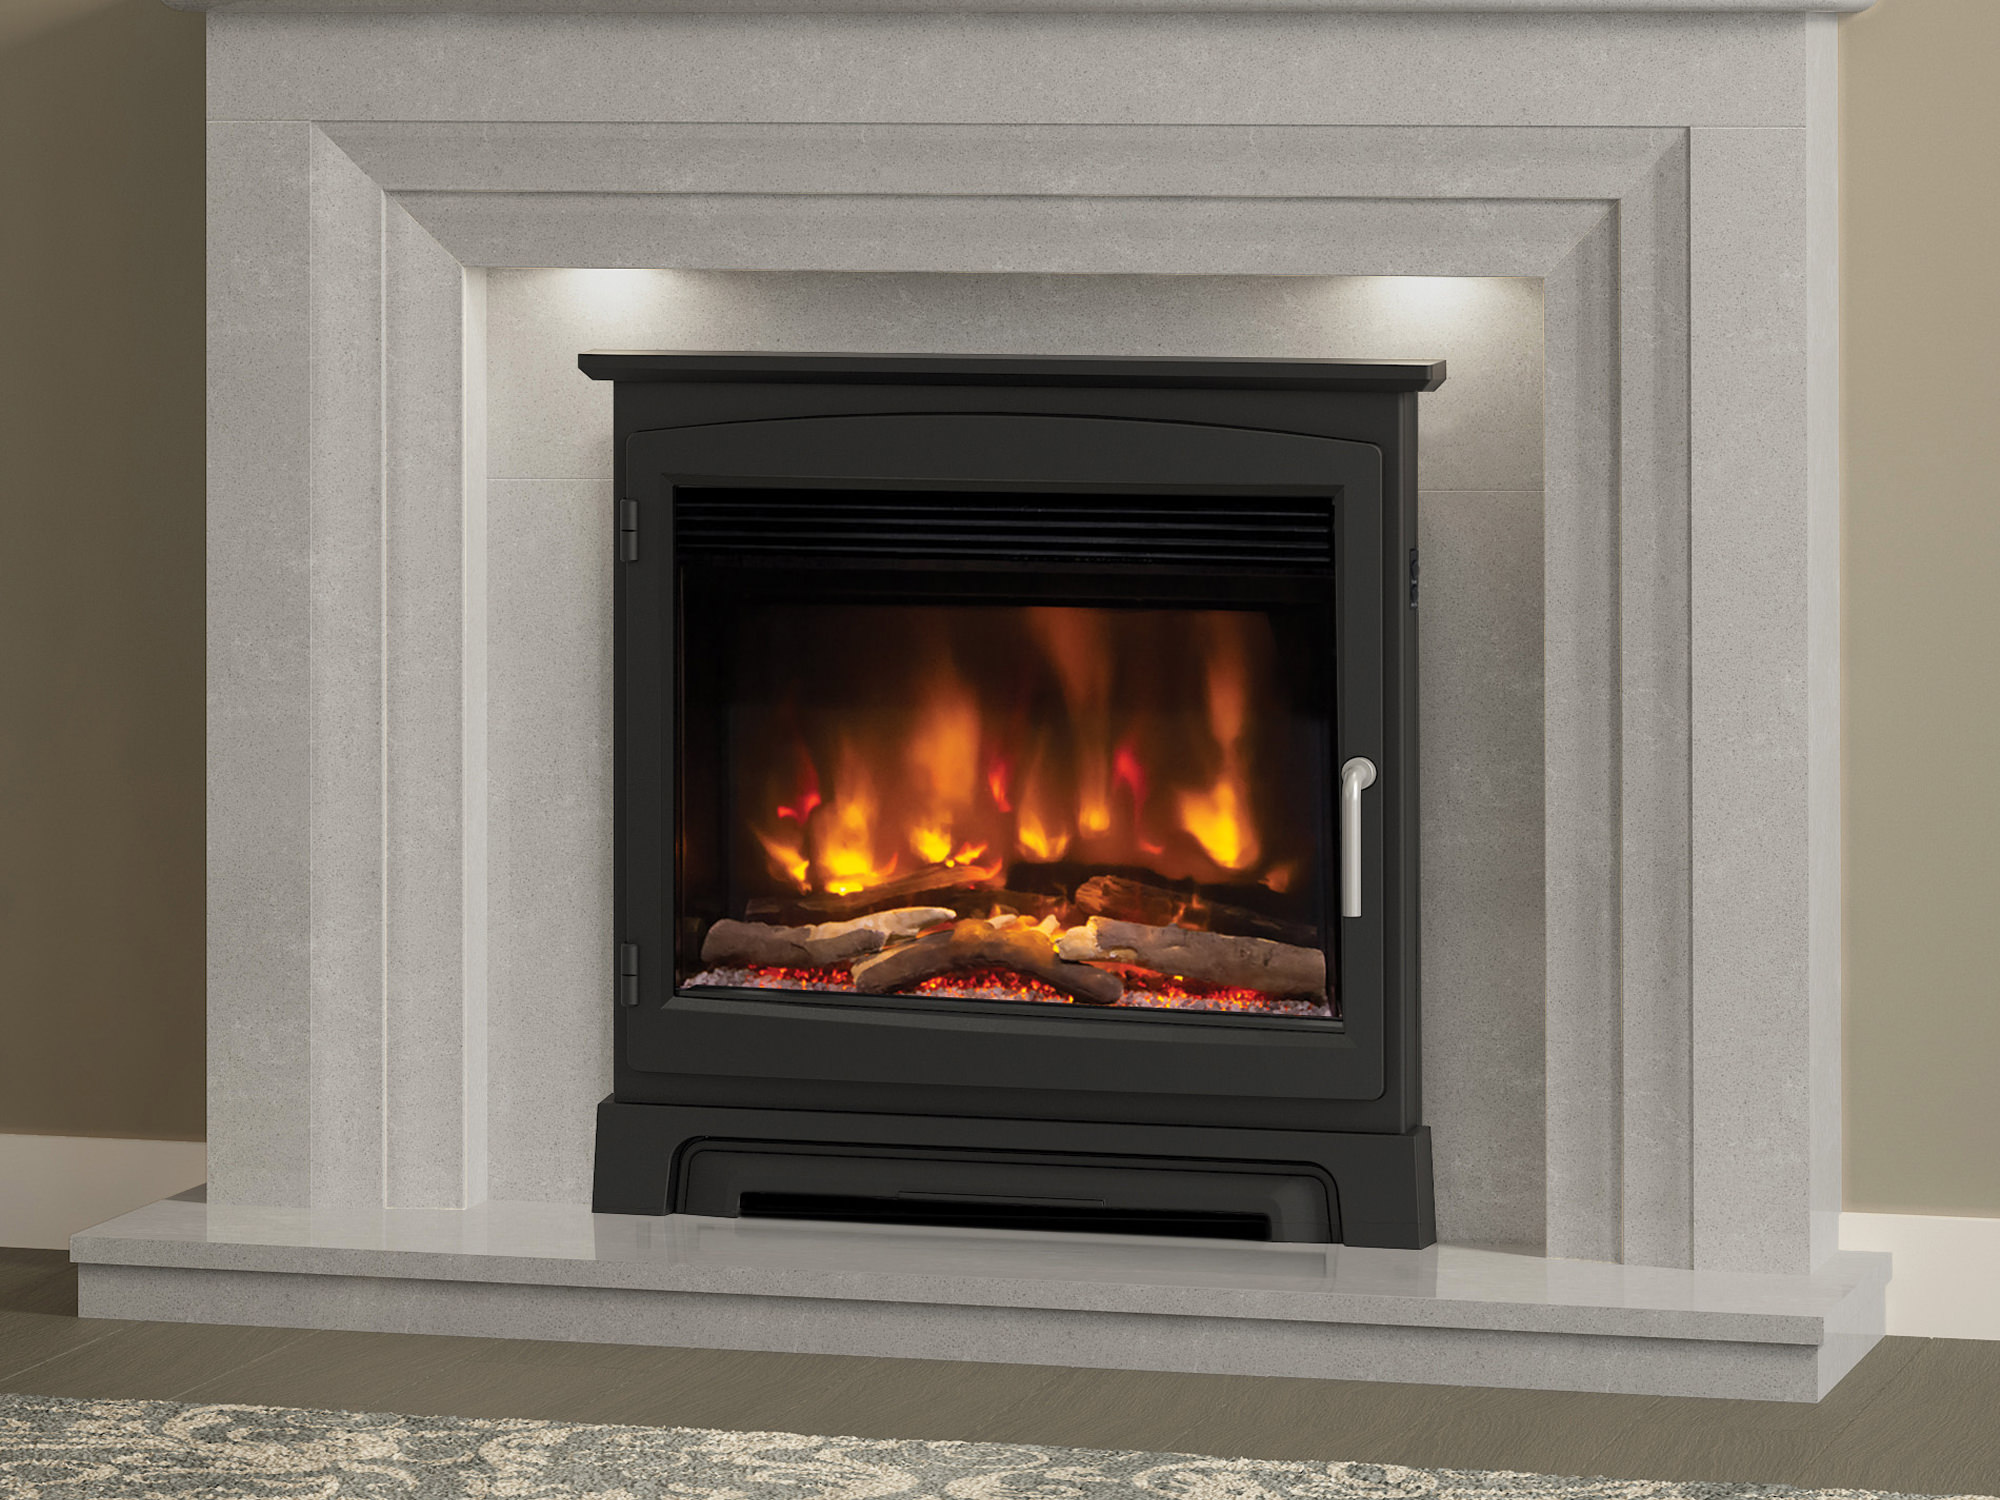 Elgin & Hall Pryzm Chollerton 22 Stove Front Electric Fire